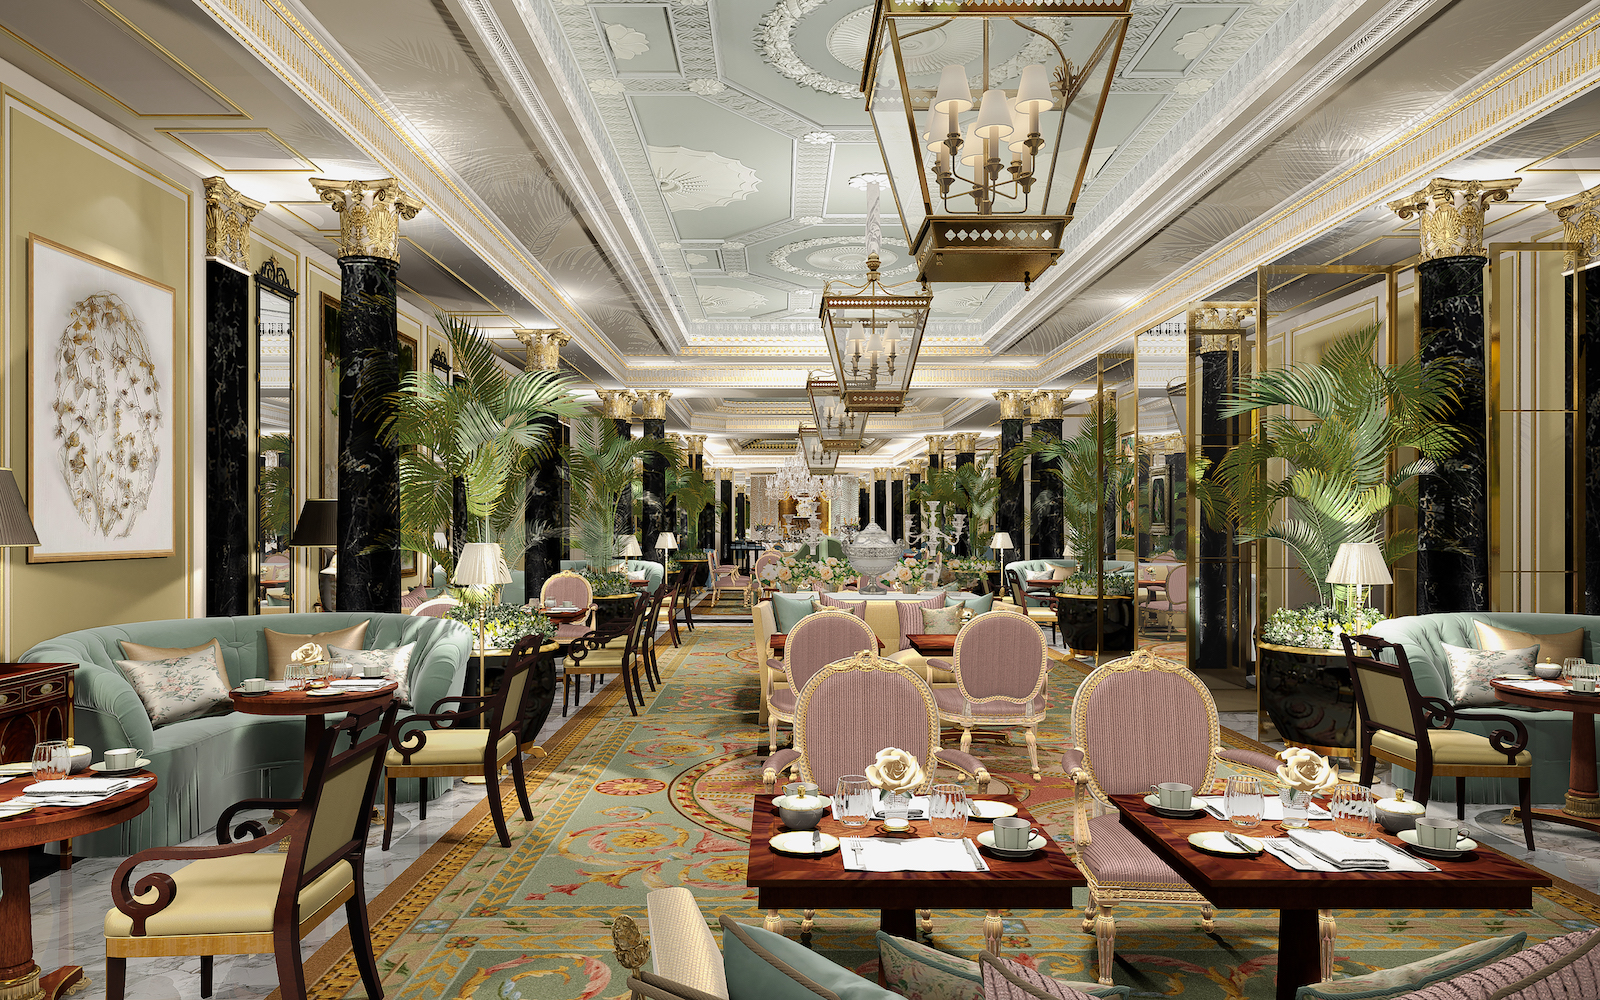 The Dorchester rendering of The Promenade Pierre-Yves Rochon